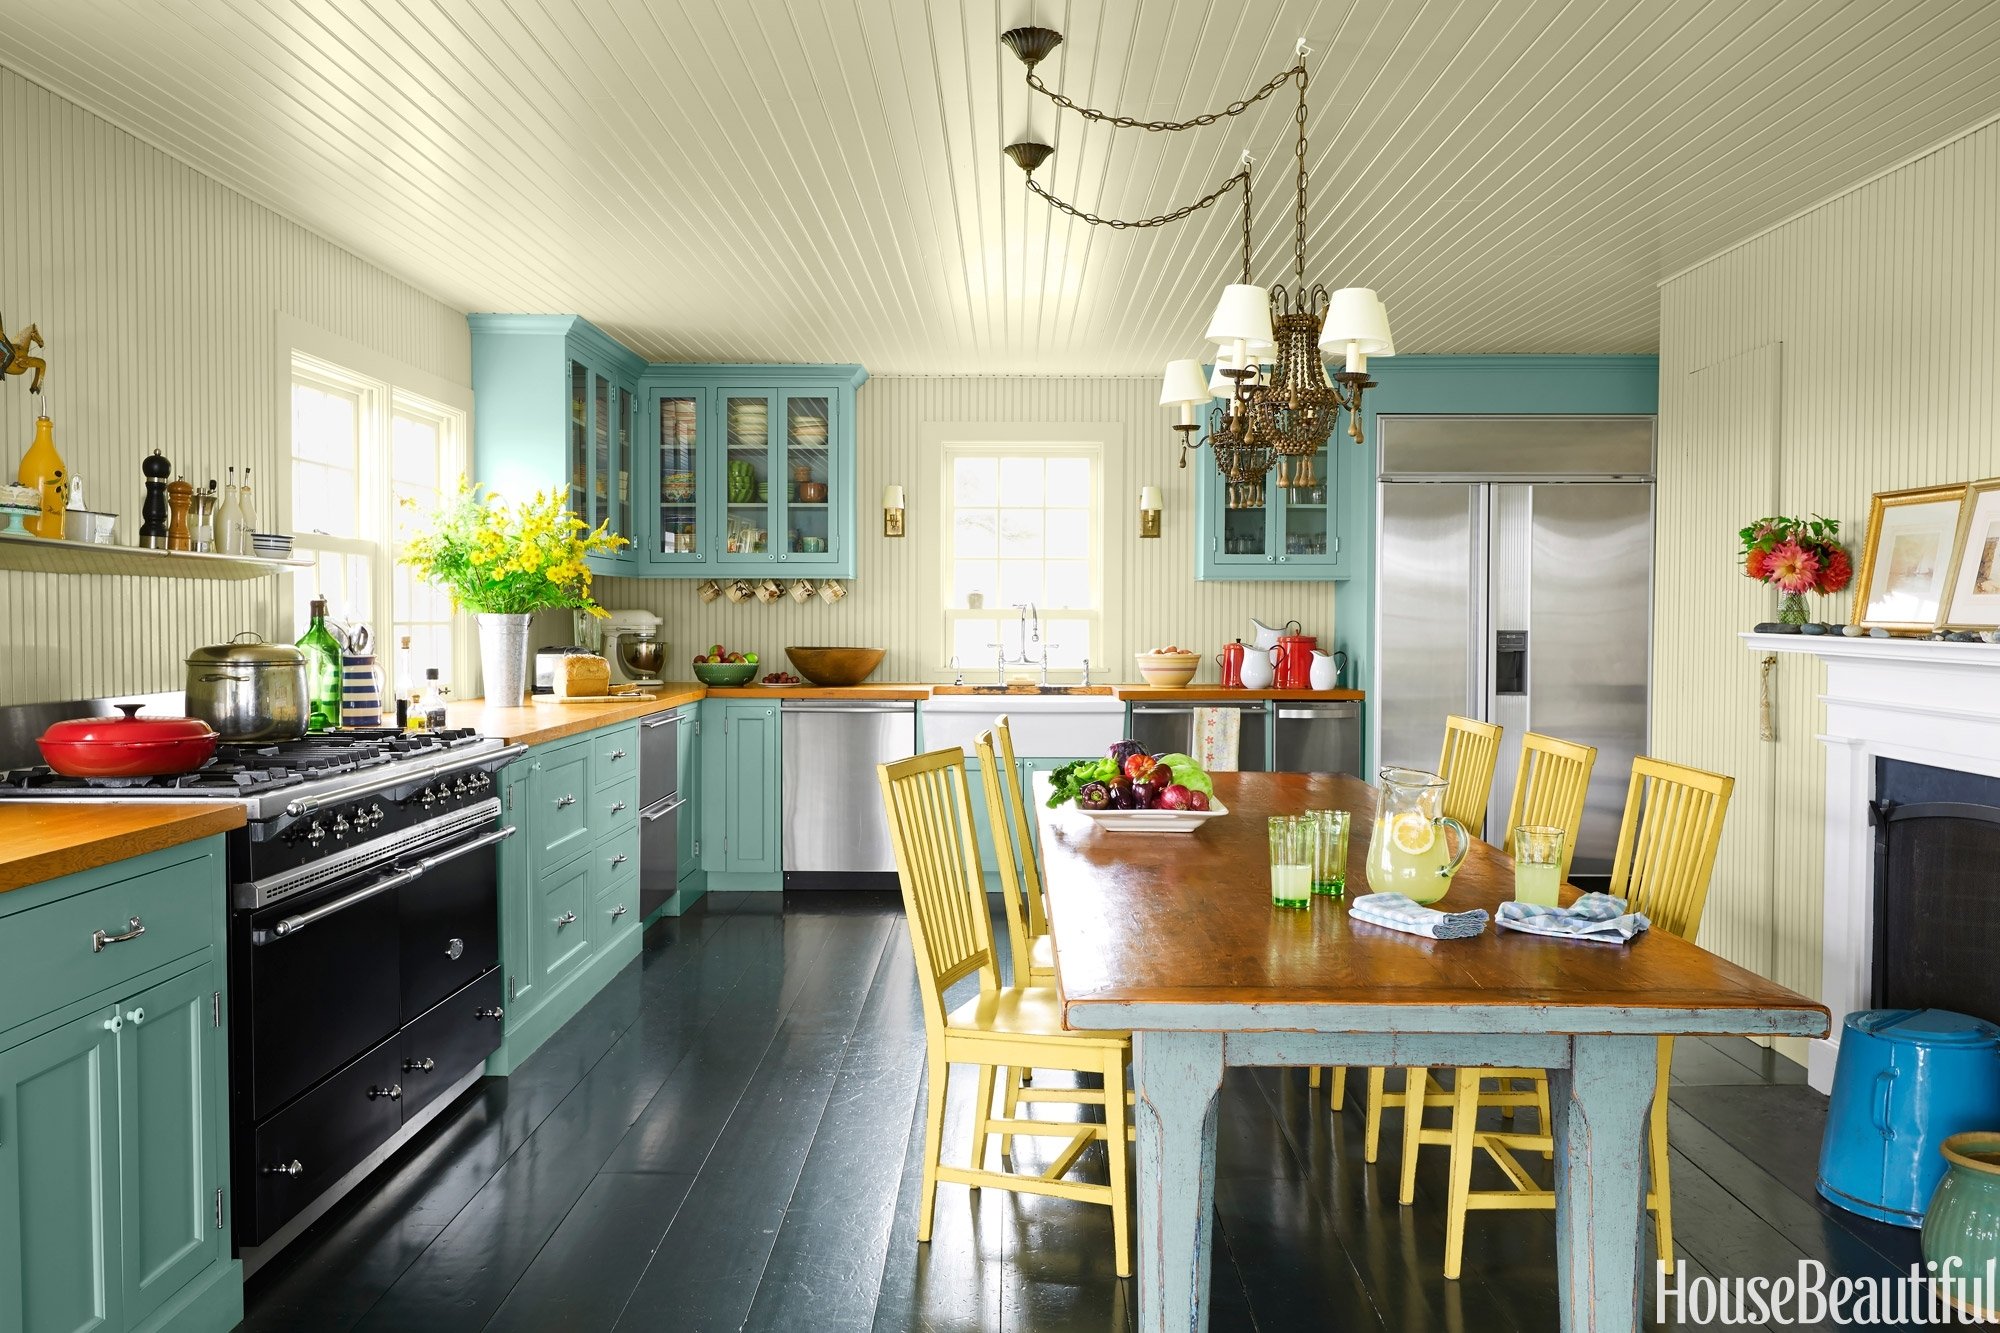 10 Lovely Paint Color Ideas For Kitchen kitchen color ideas for small kitchens gostarry 2022